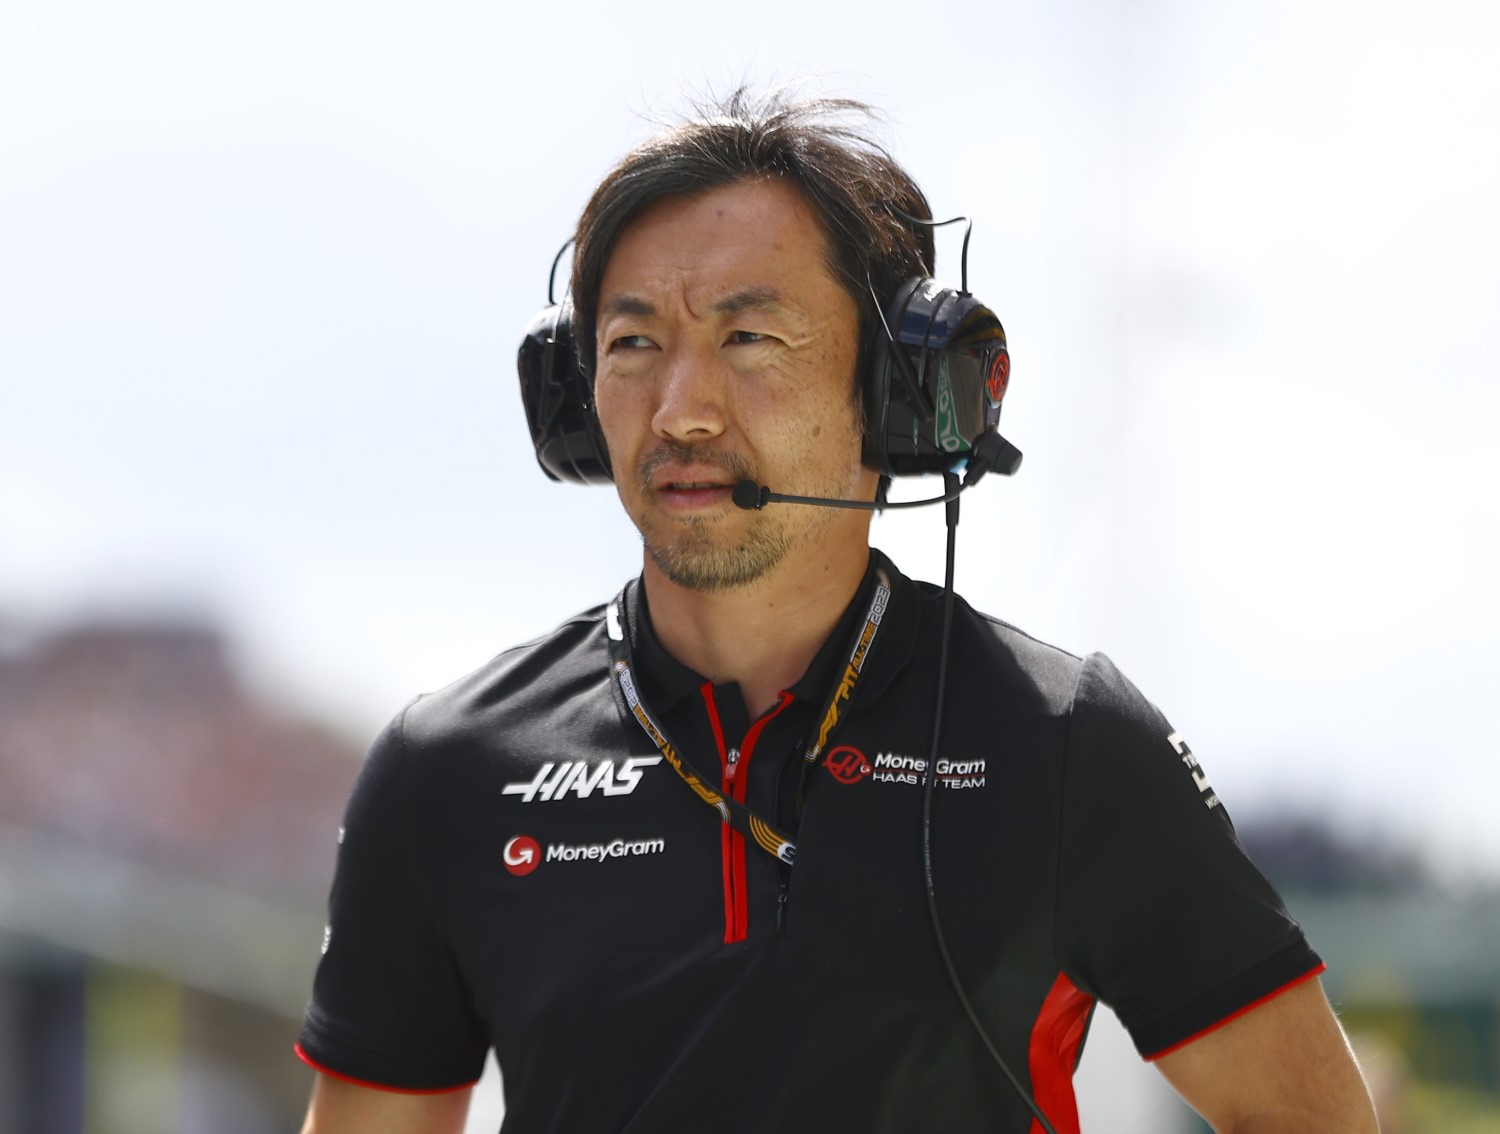 RED BULL RING, AUSTRIA - JULY 02: Ayao Komatsu, Chief Engineer, Haas F1 Team during the Austrian GP at Red Bull Ring on Sunday July 02, 2023 in Spielberg, Austria. (Photo by Andy Hone / LAT Images)